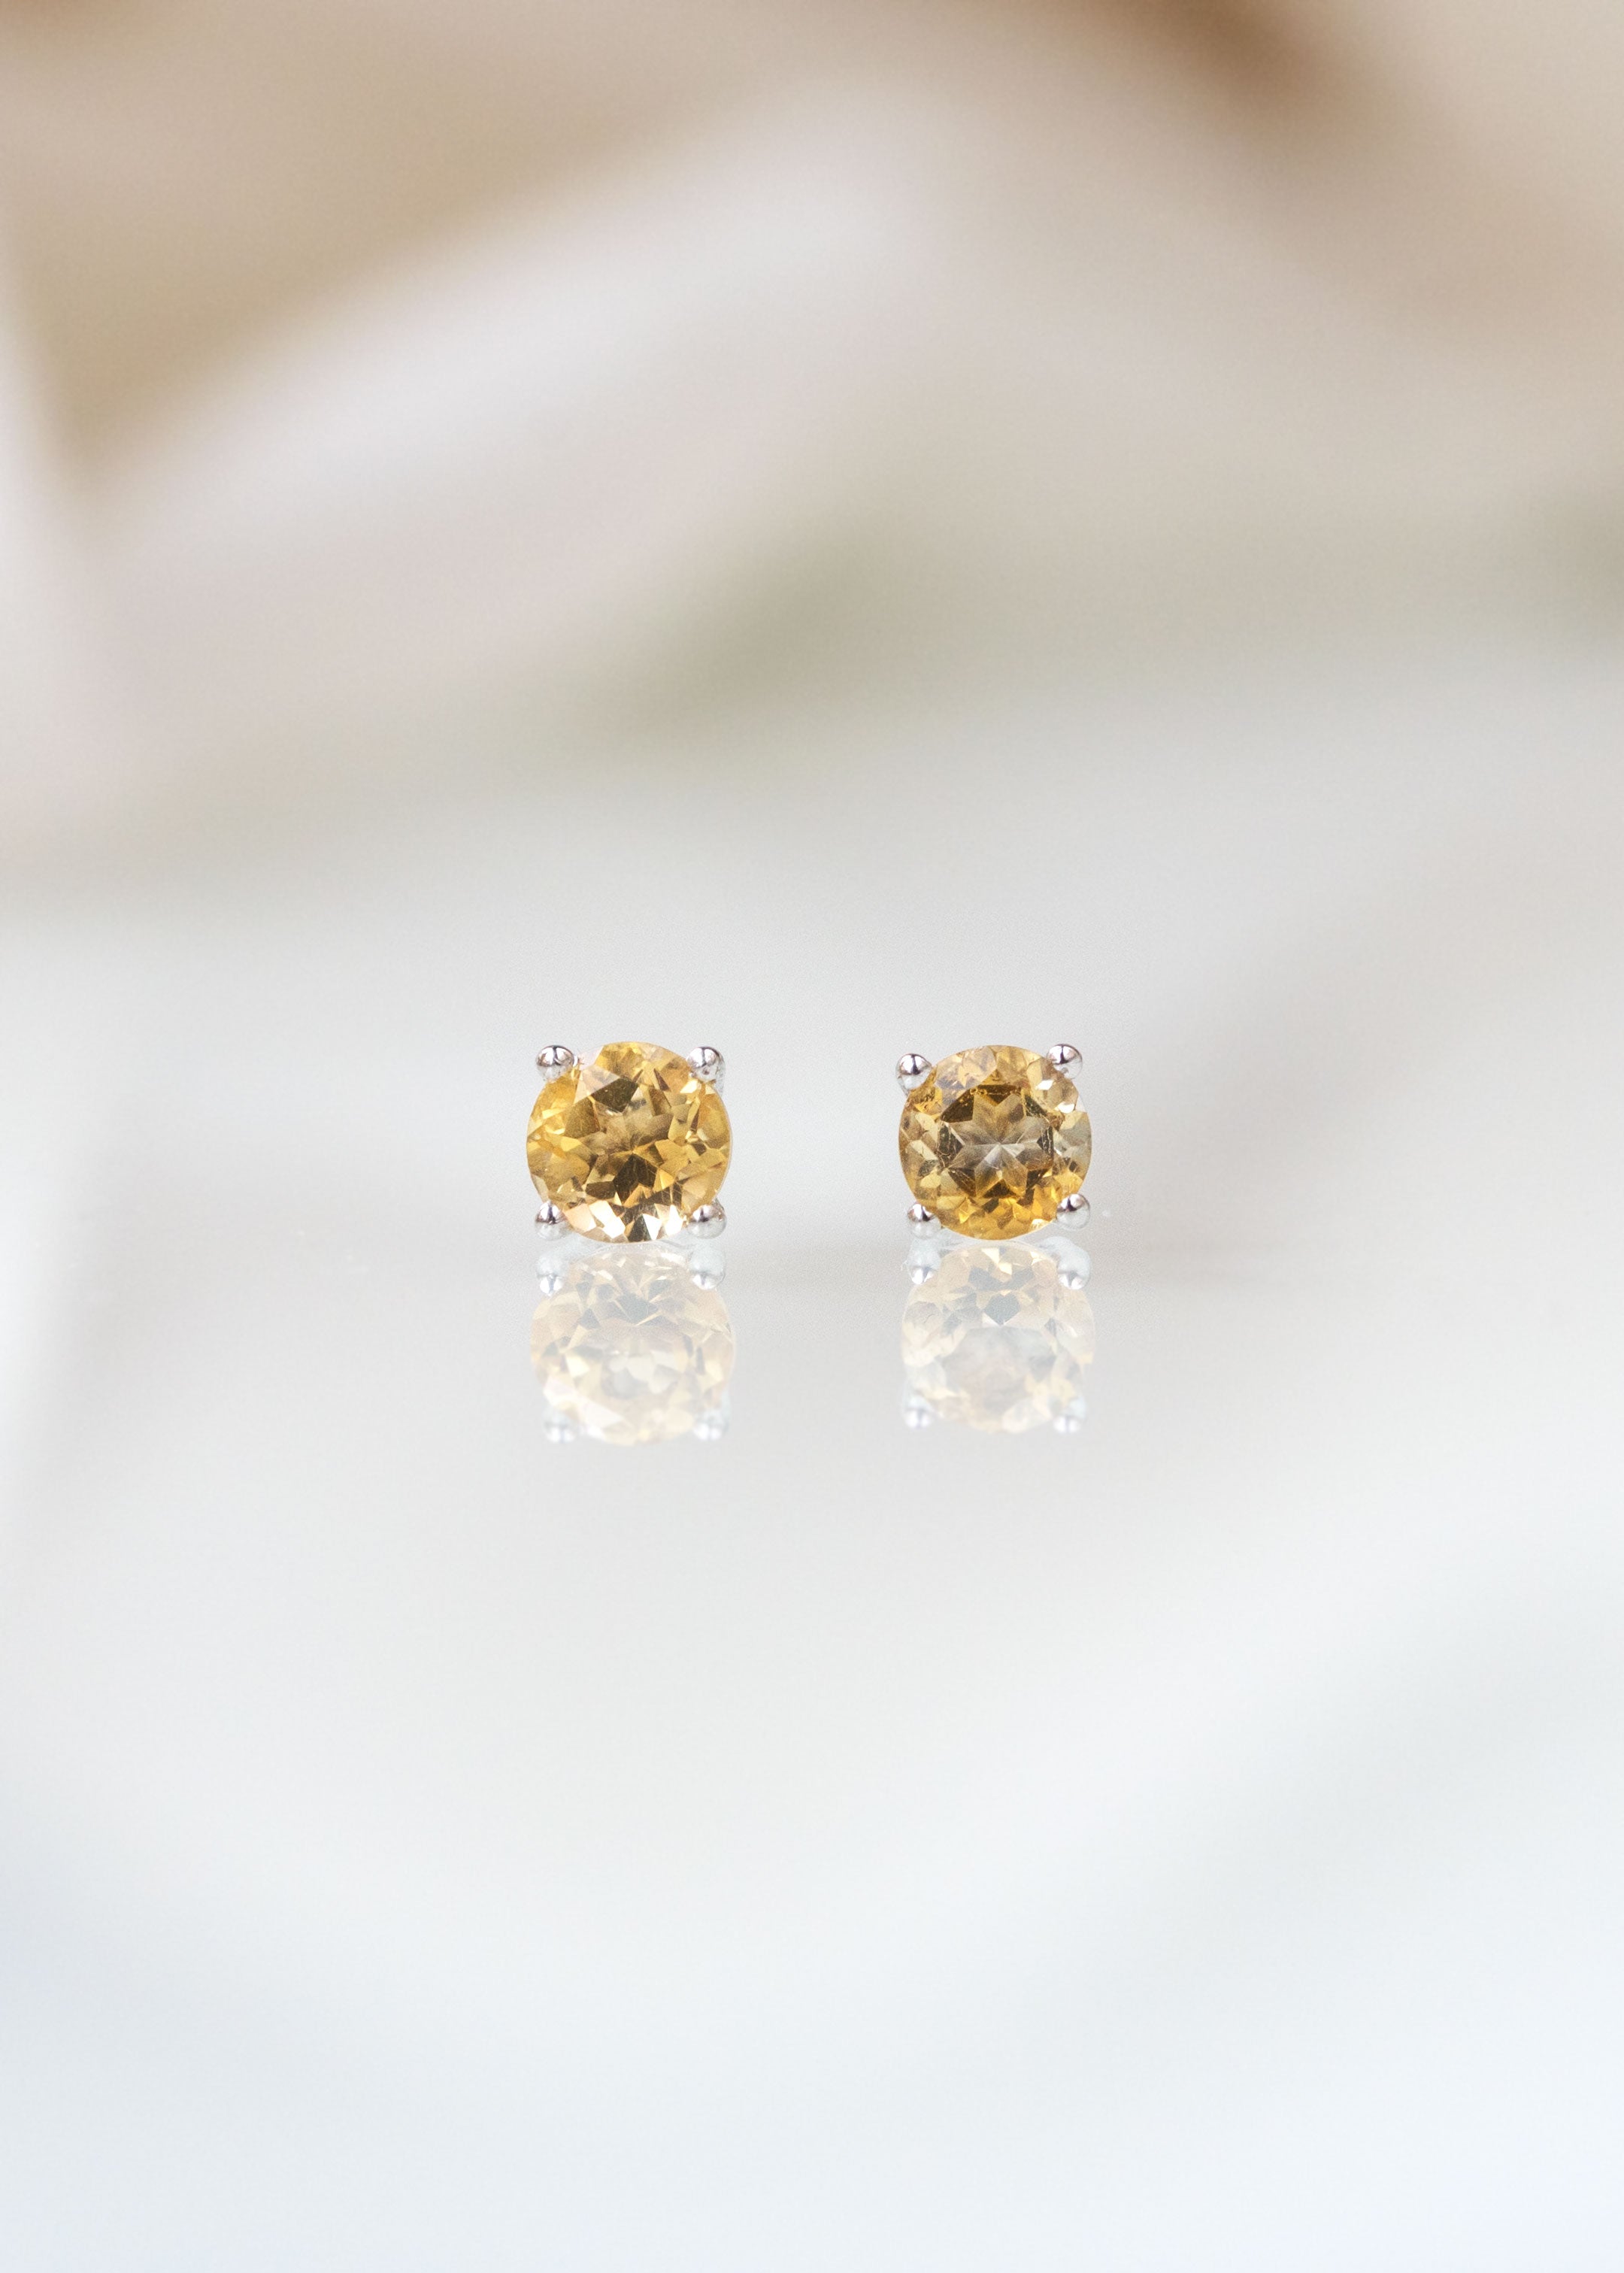 Citrine Tiny Studs Earrings second piercing cartilage dainty sterling silver